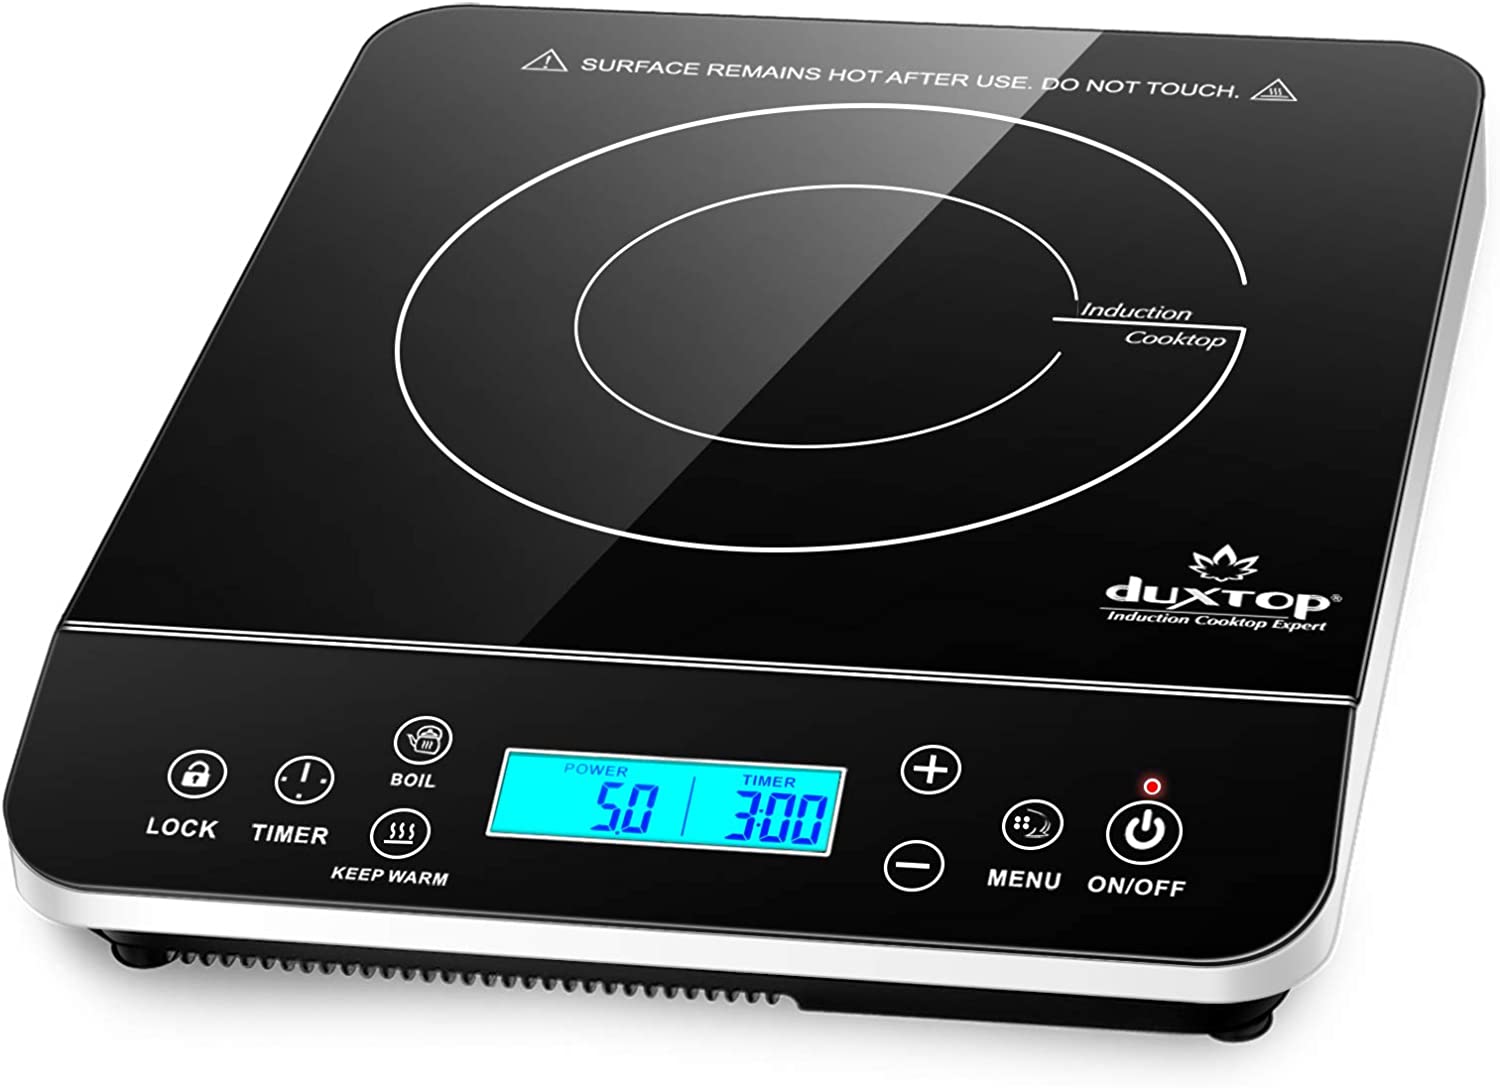 https://discounttoday.net/wp-content/uploads/2022/10/Duxtop-Portable-Induction-Cooktop-Countertop-Burner-Induction-Hot-Plate-with-LCD-Sensor-Touch-1800-Watts-Silver-9600LS-BT-200DZ.jpg